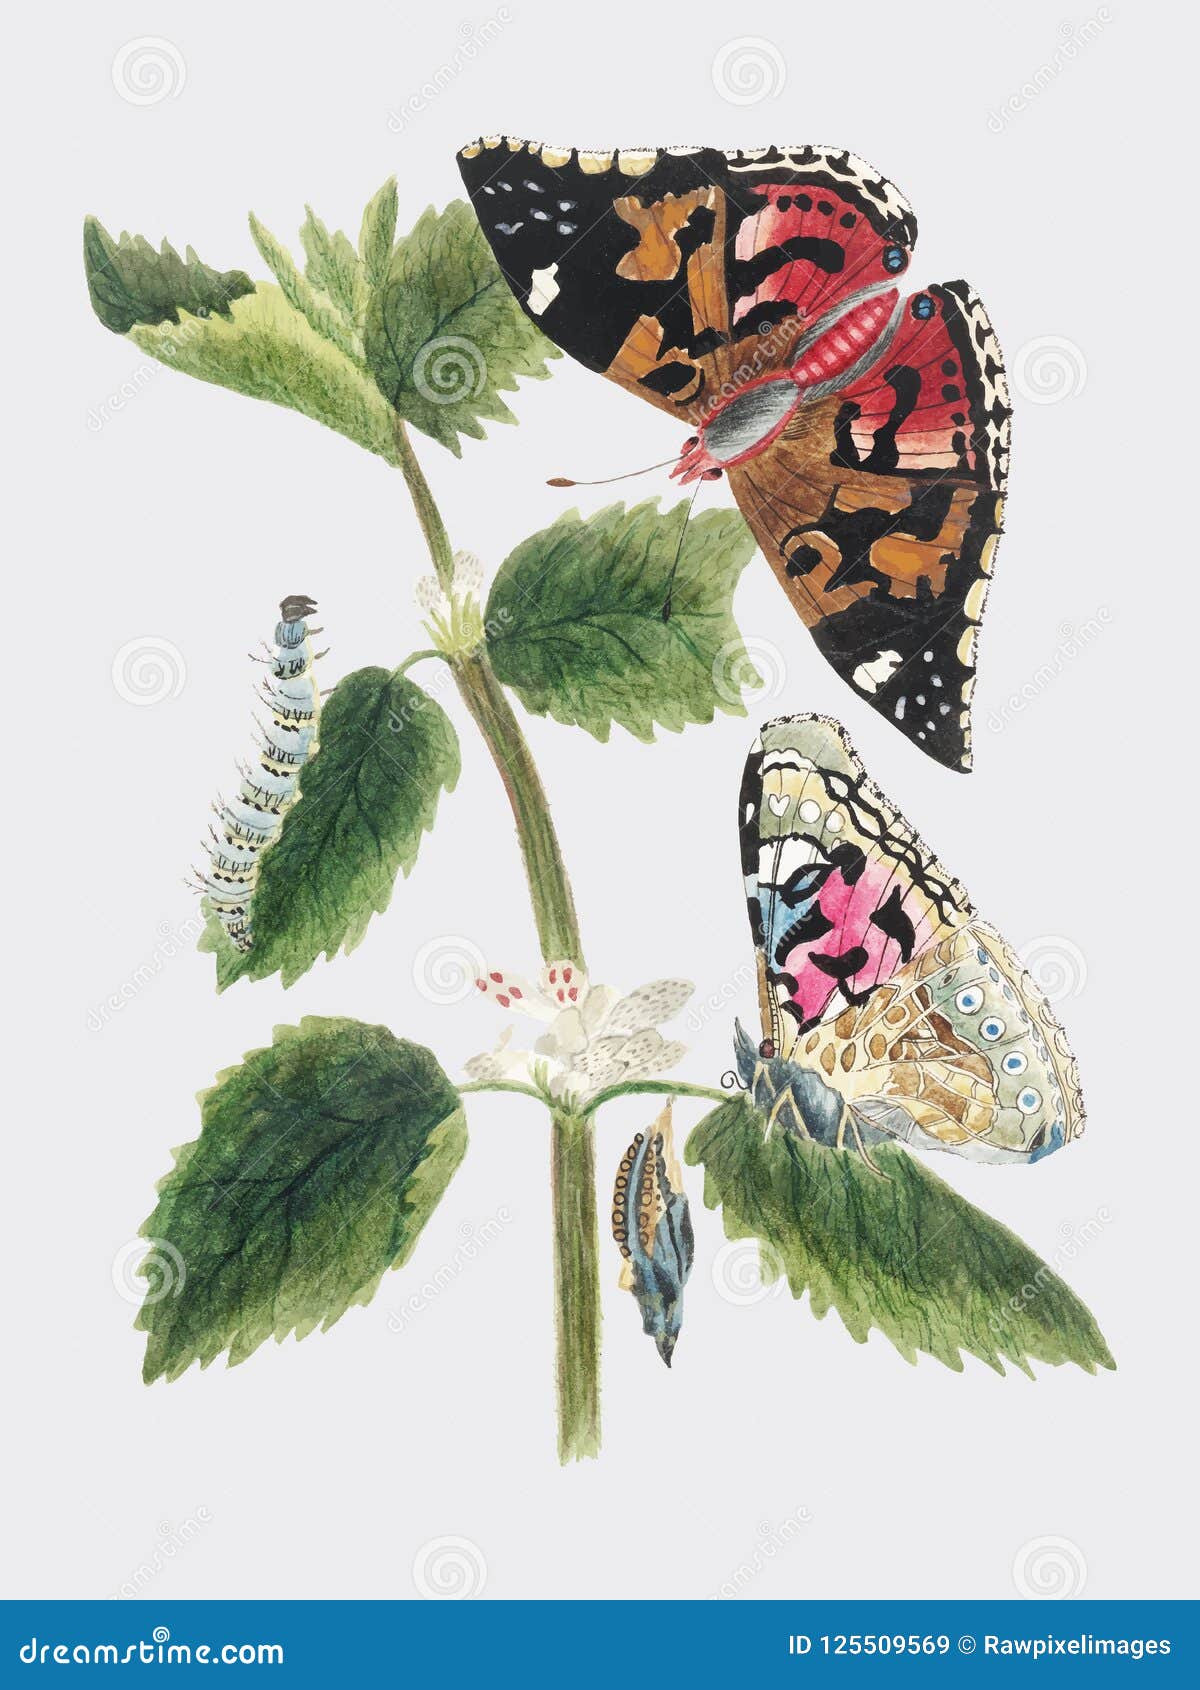 antique watercolor  of nettle butterfly in various life stages published in 1824 by m.p. digitally enhanced by rawpixe